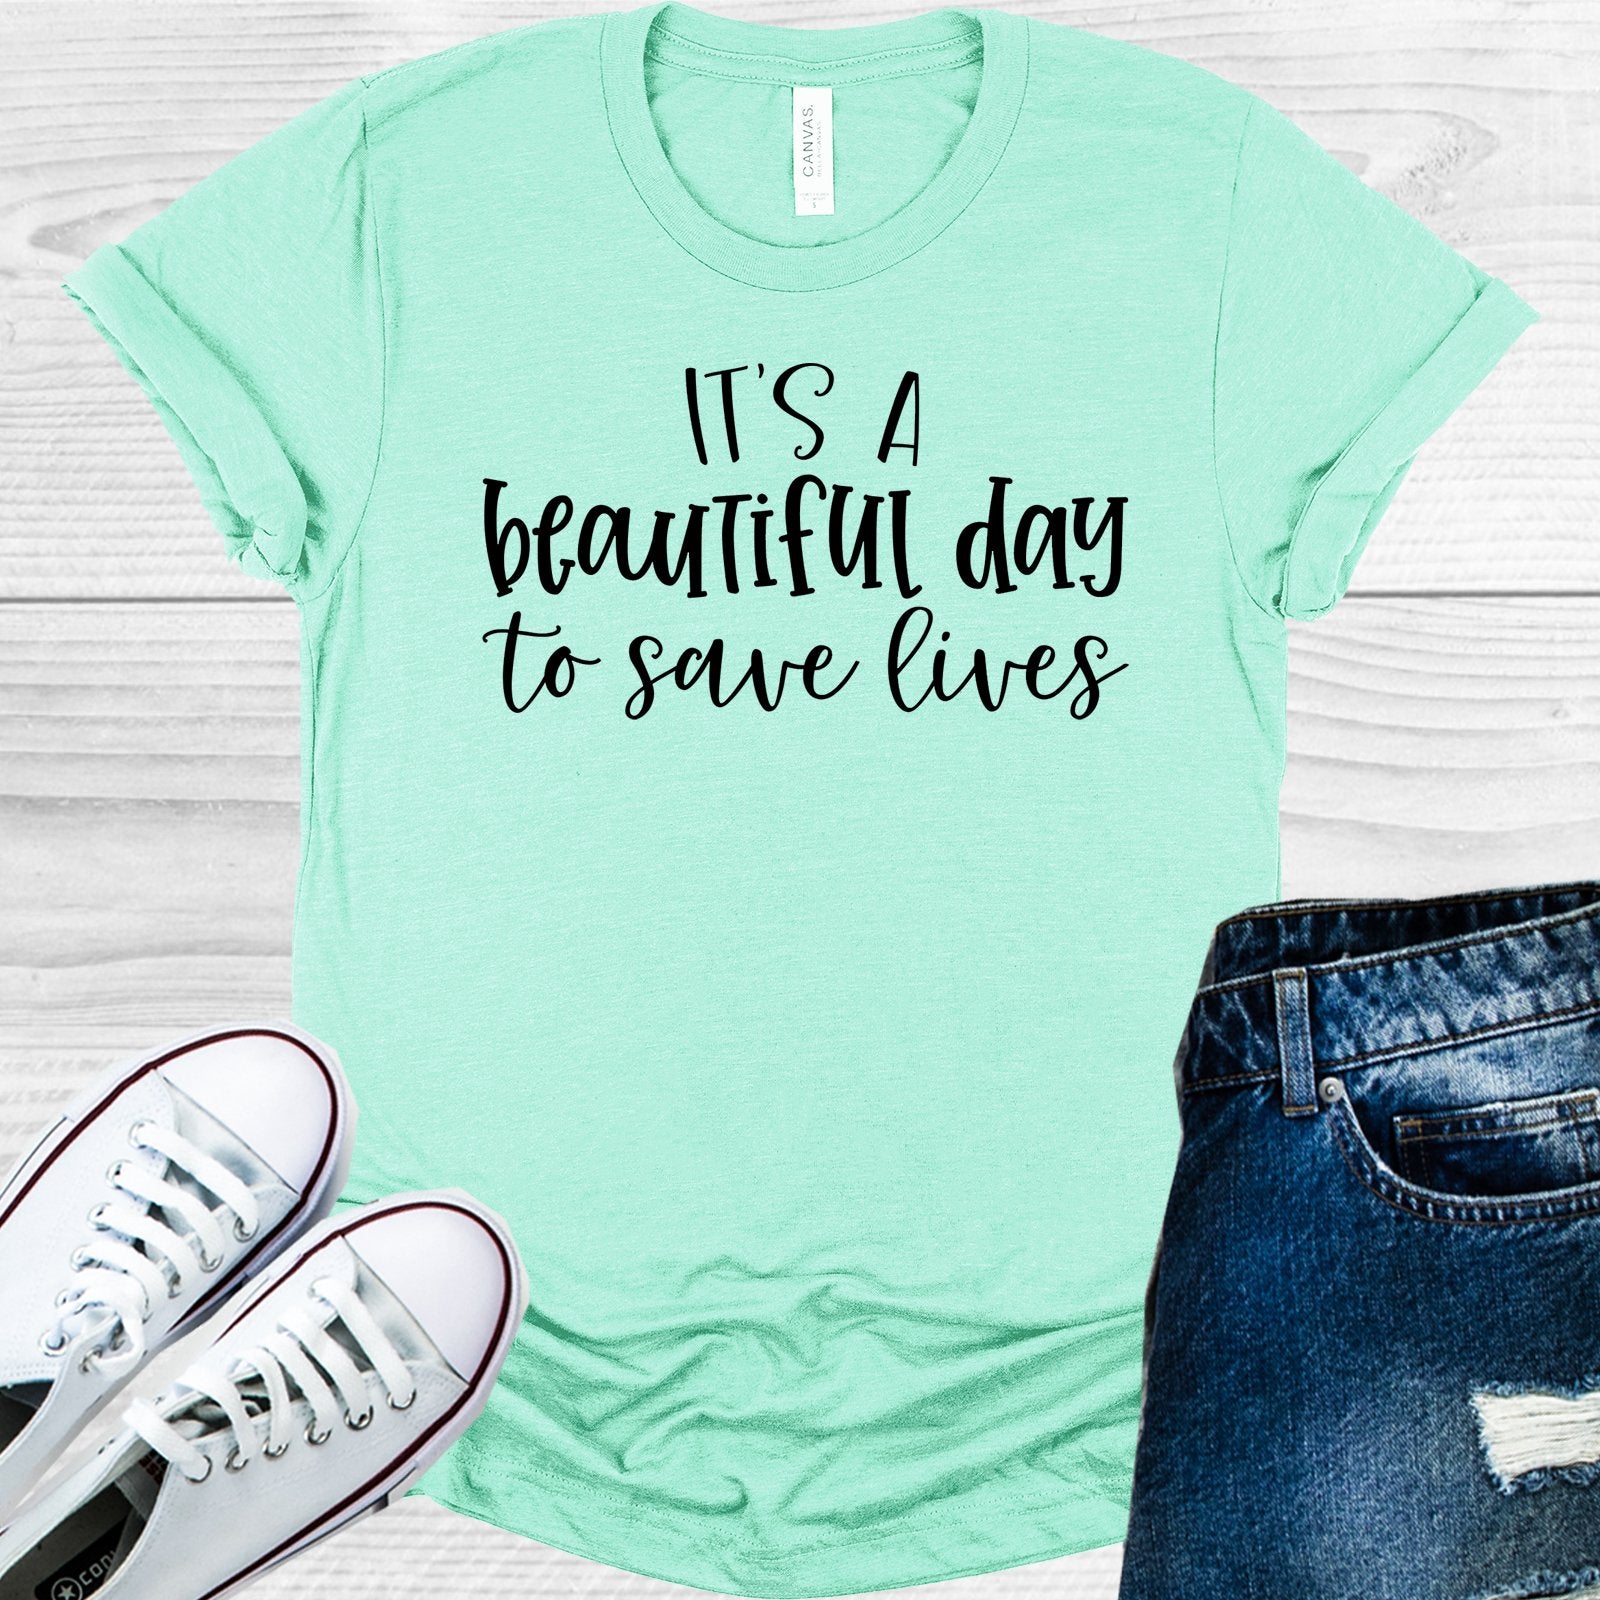 Greys Anatomy: Its A Beautiful Day To Save Lives Graphic Tee Graphic Tee